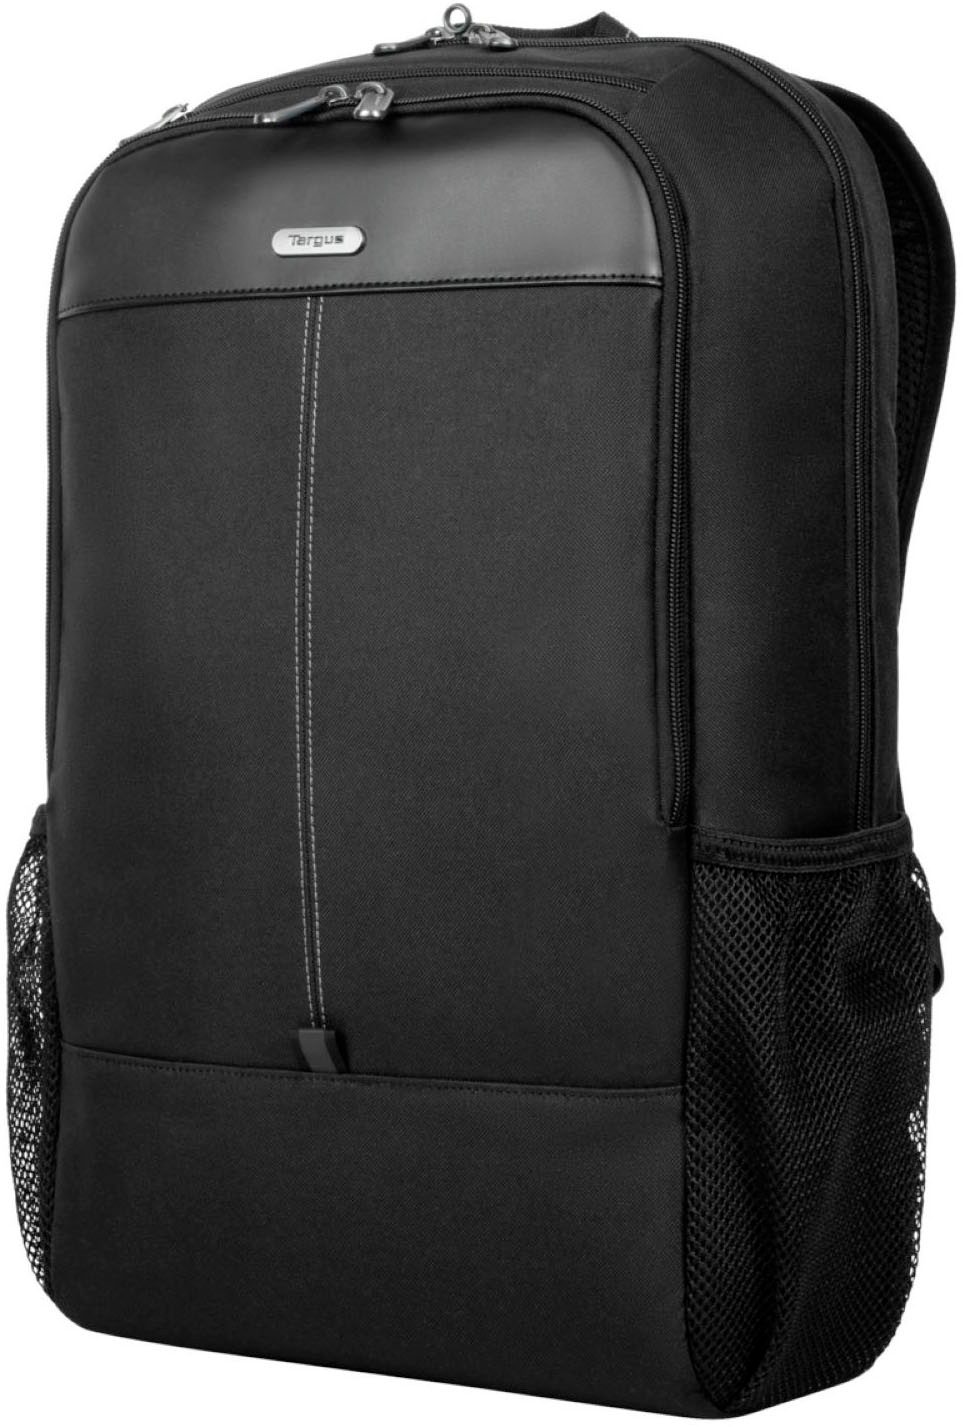 Angle View: Samsonite - Classic Leather Slim Backpack for 14.1" Laptop - Black